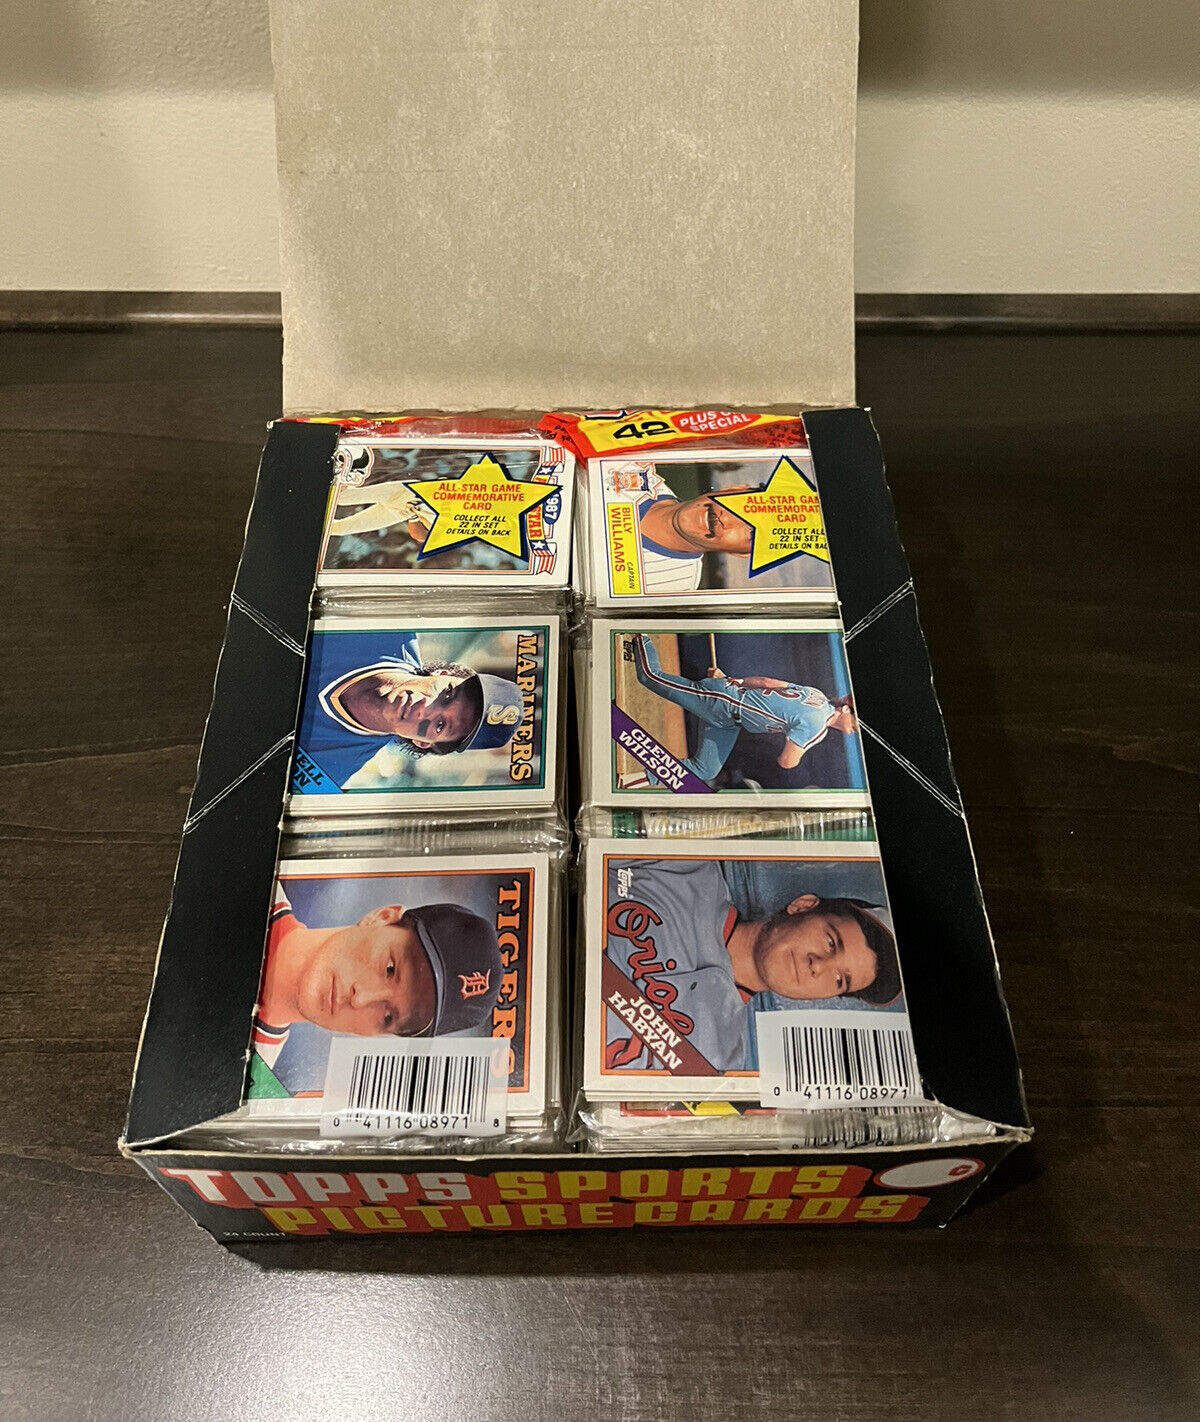 1988 TOPPS BASEBALL SPORTS PICTURE CARDS